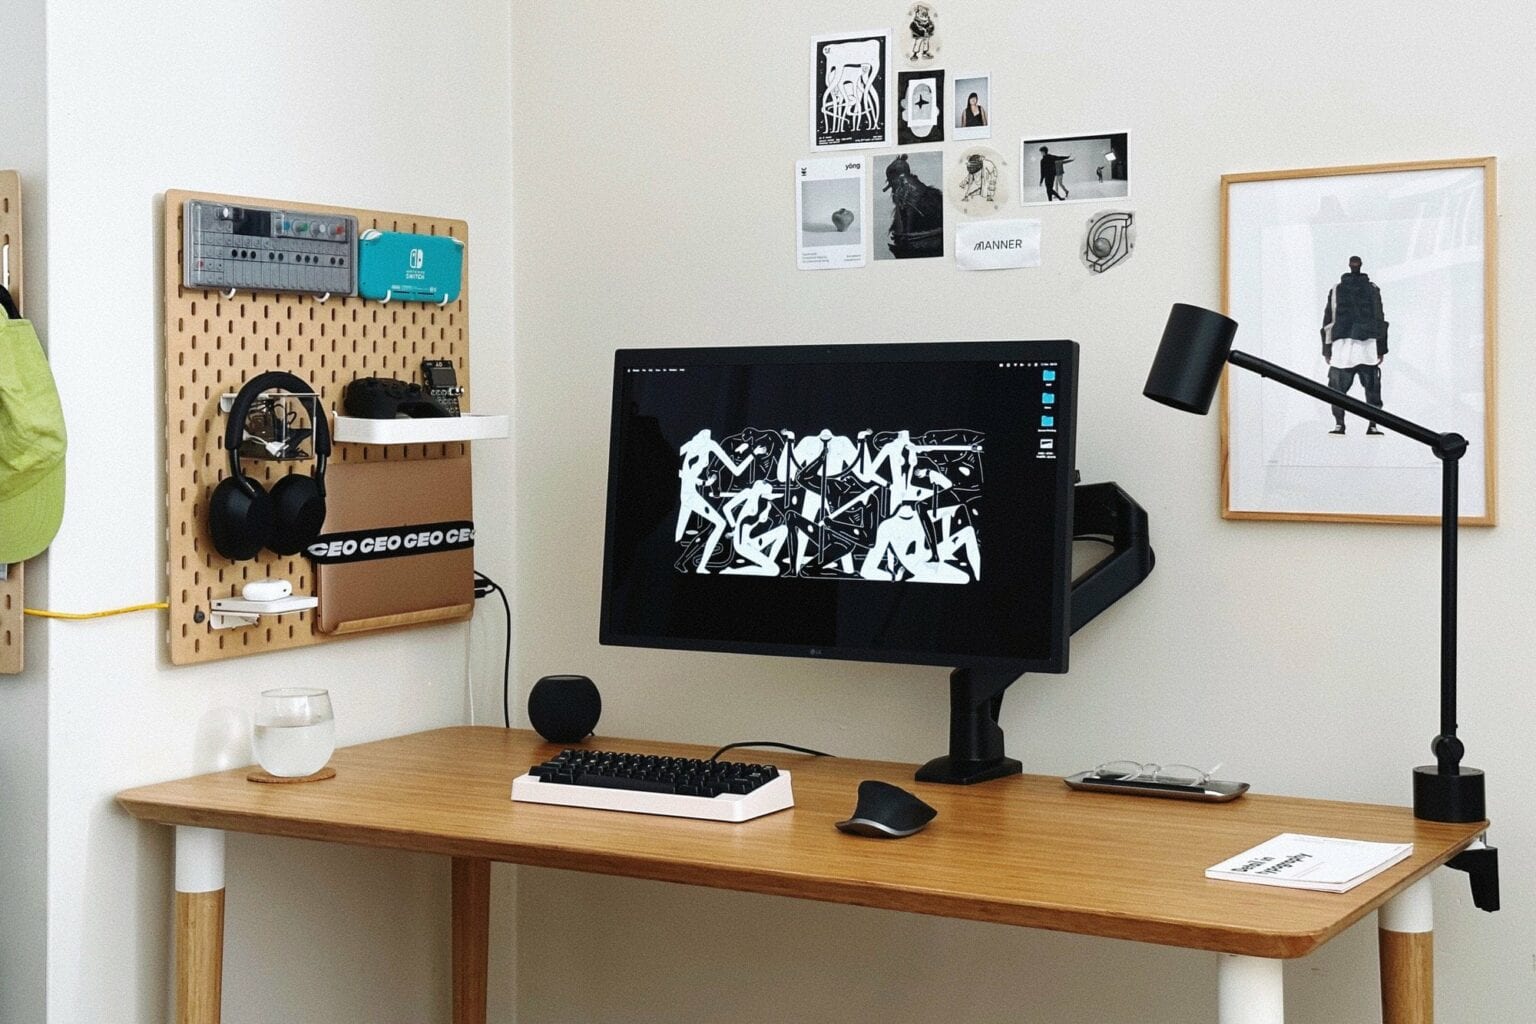 Want to save some space on the desk? Try mounting your laptop on a pegboard.